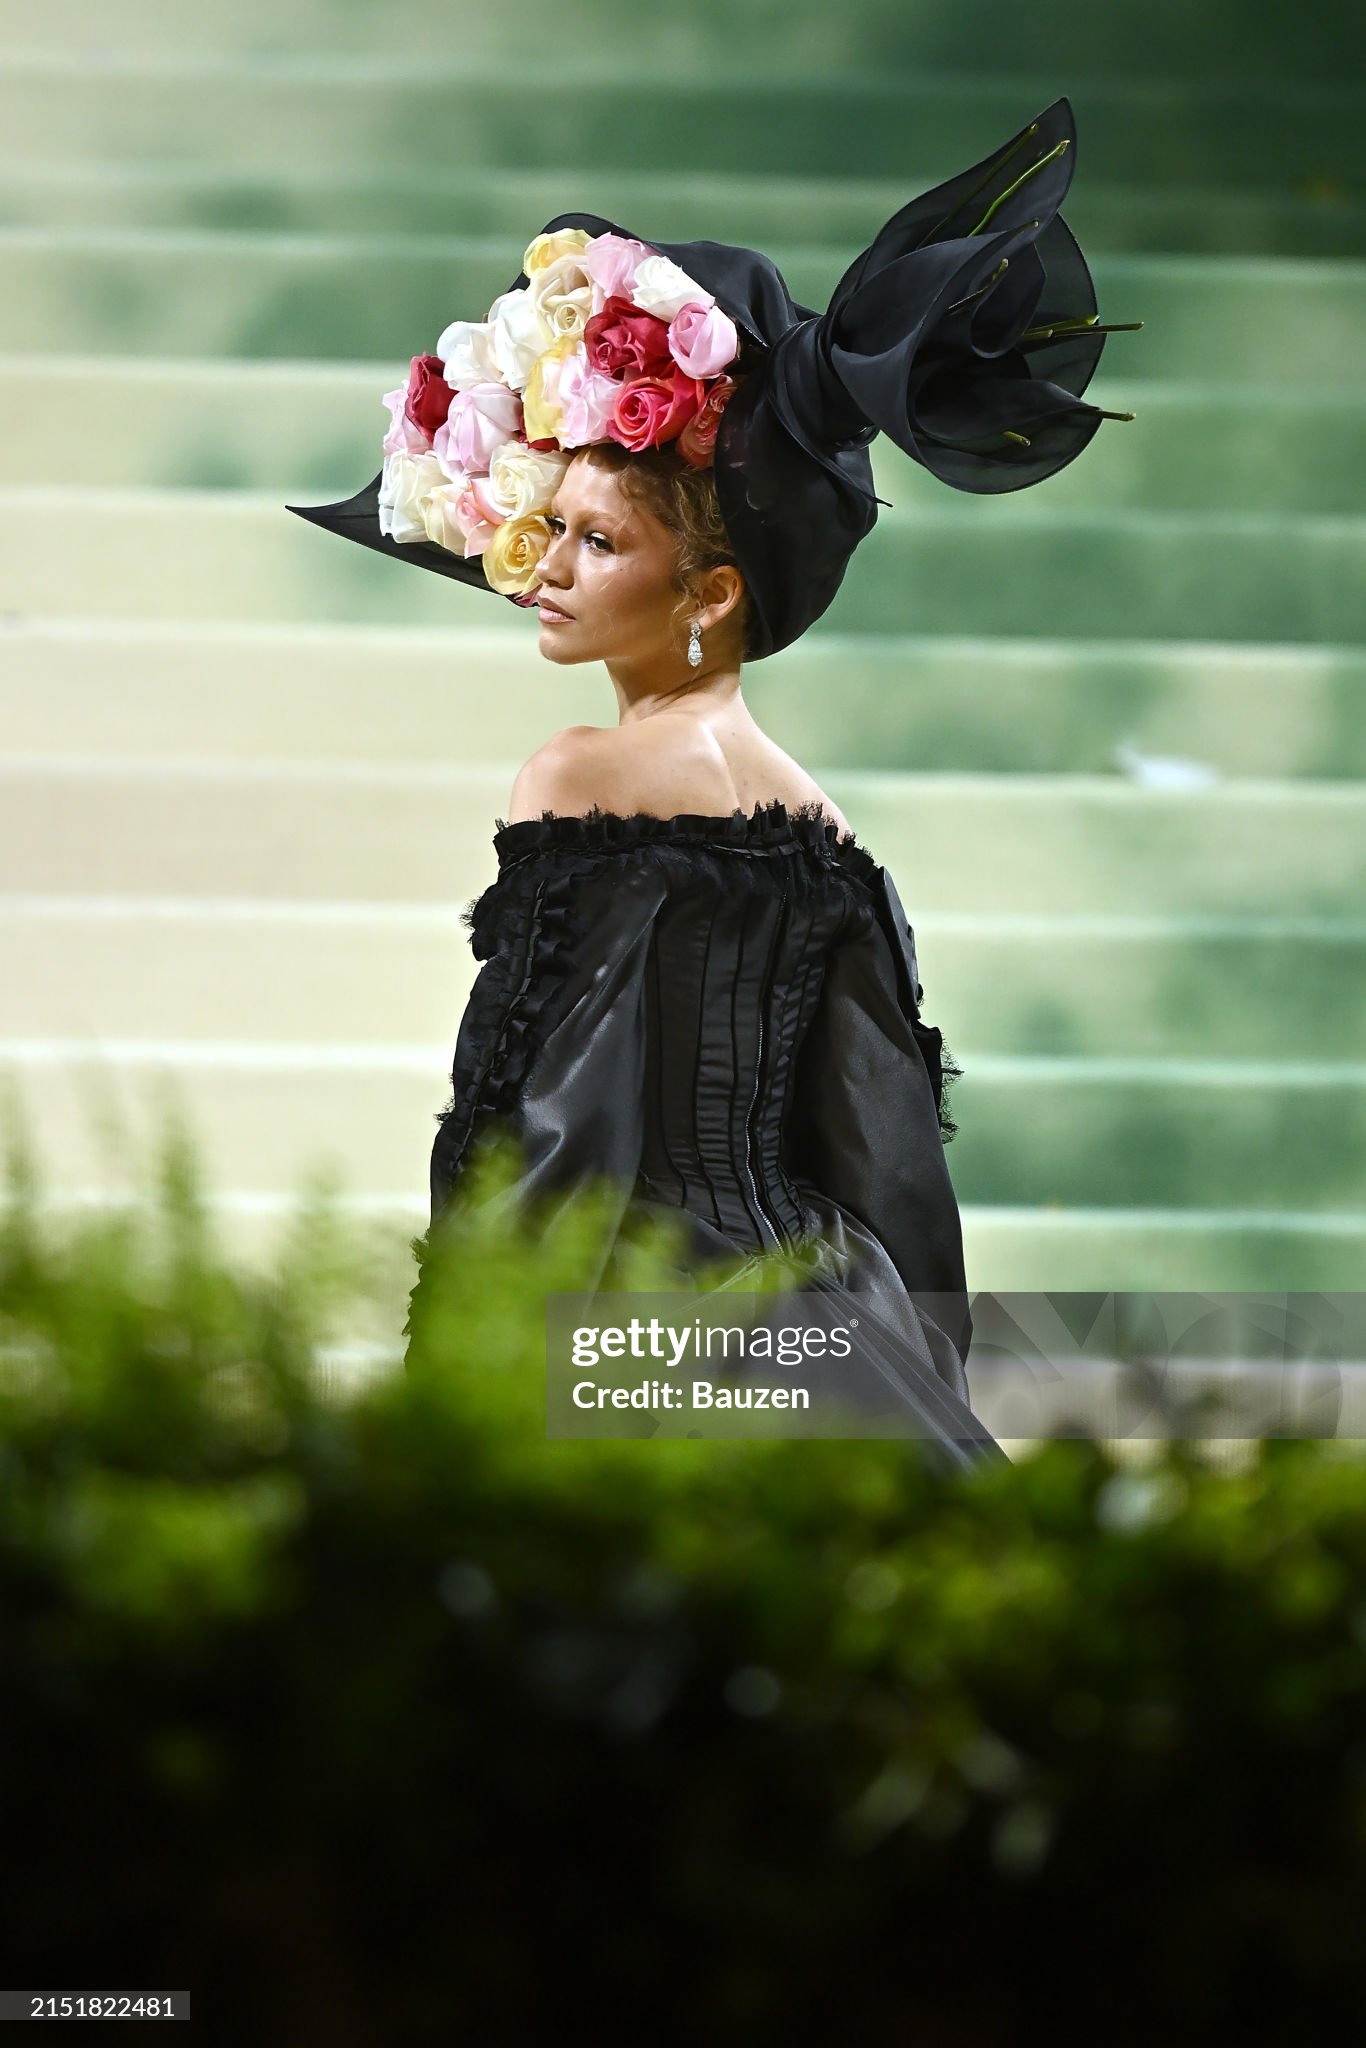 gettyimages-2151822481-2048x2048.jpg